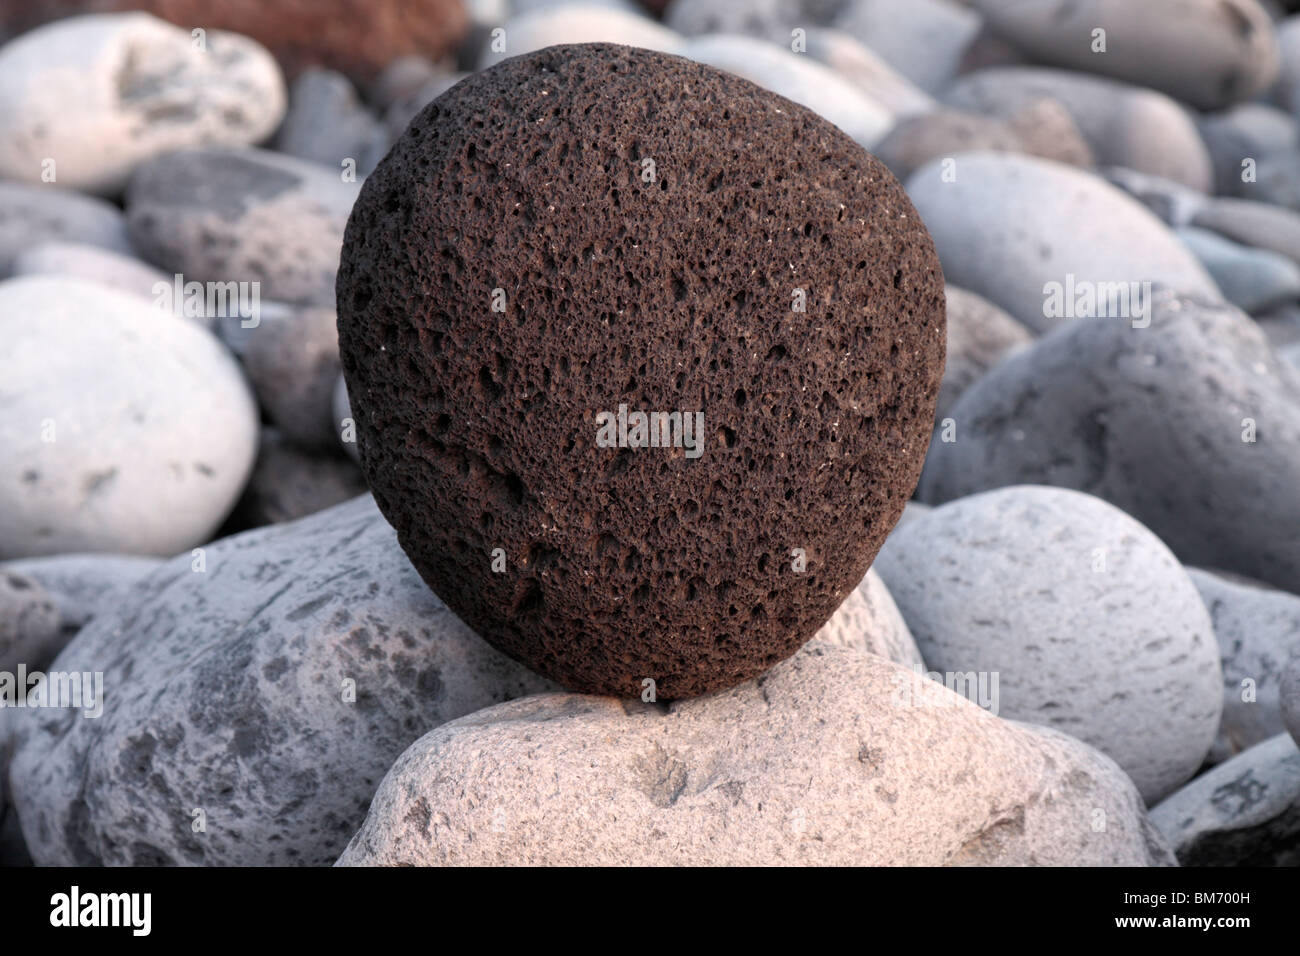 Close up of pebbles and stones on the beach at Playa San Juan Tenerife Canary Islands Spain Stock Photo